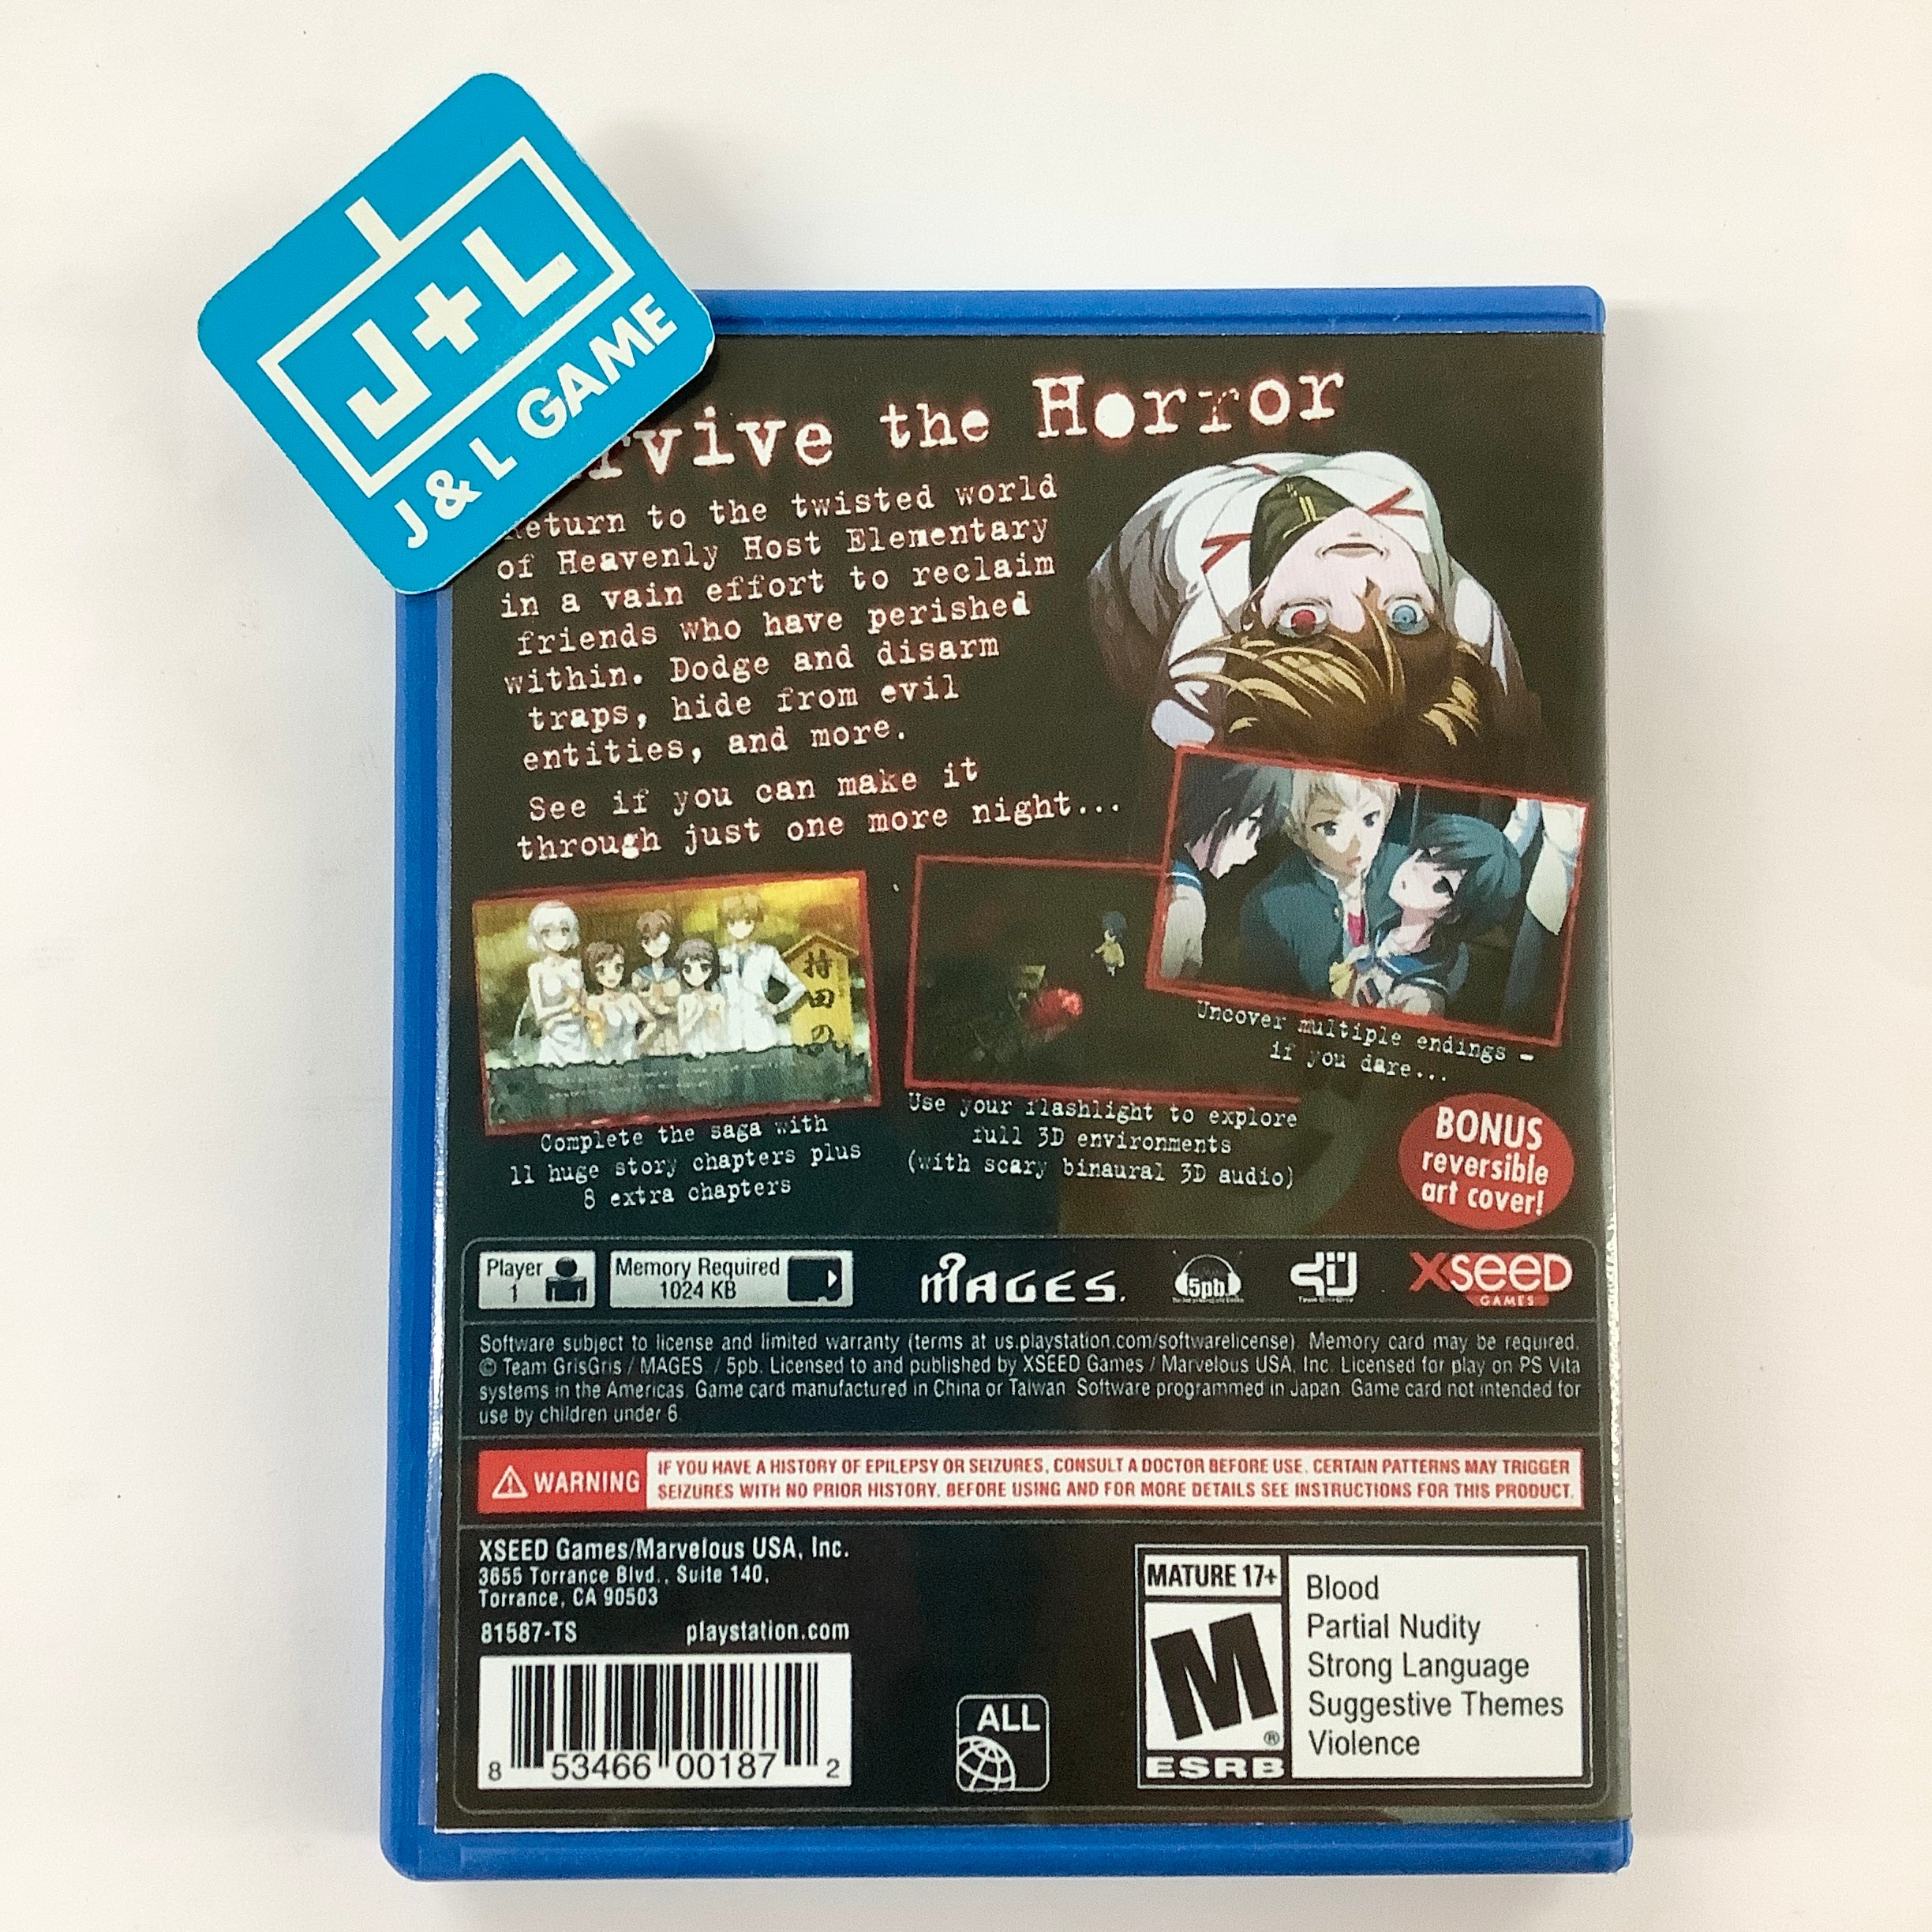 Corpse Party: Blood Drive - (PSV) PlayStation Vita [Pre-Owned] Video Games XSEED Games   